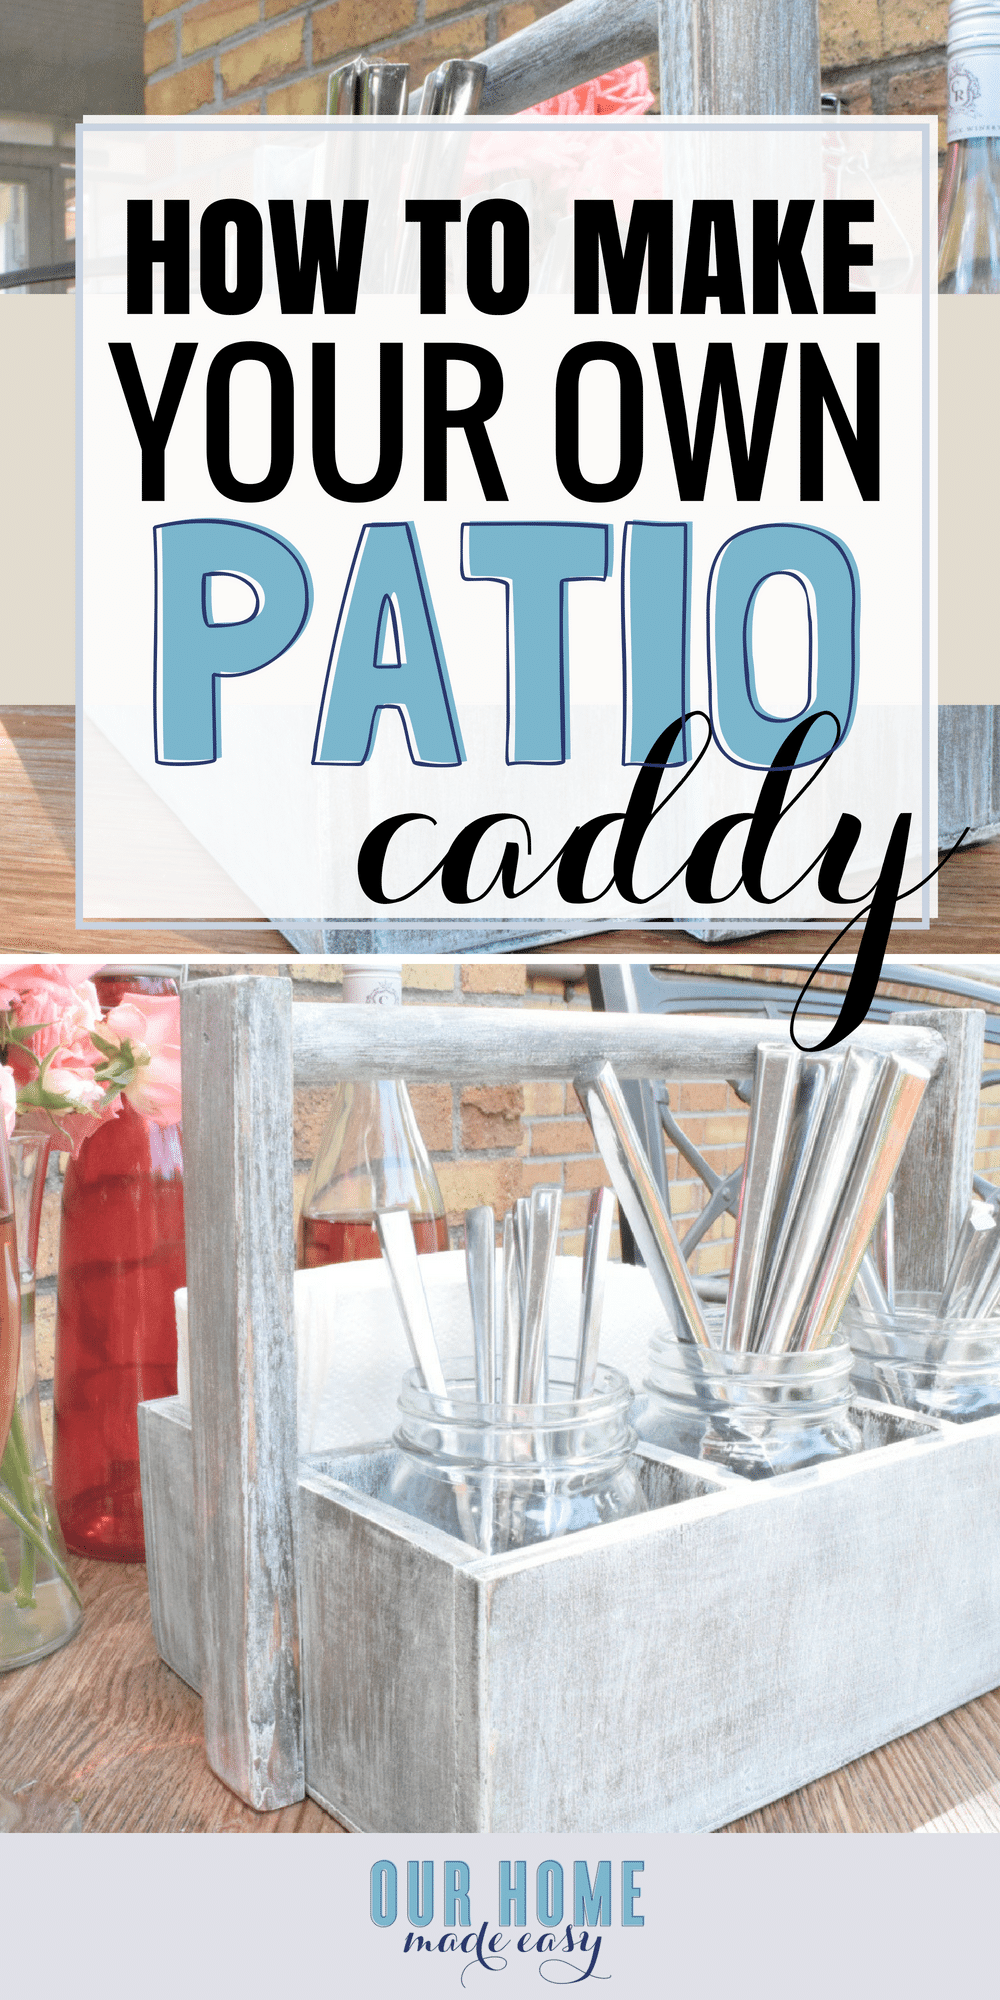 Make this DIY patio caddy for your just in time for your next BBQ or tailgate! It's perfect for combining function & style! Get all the steps here!